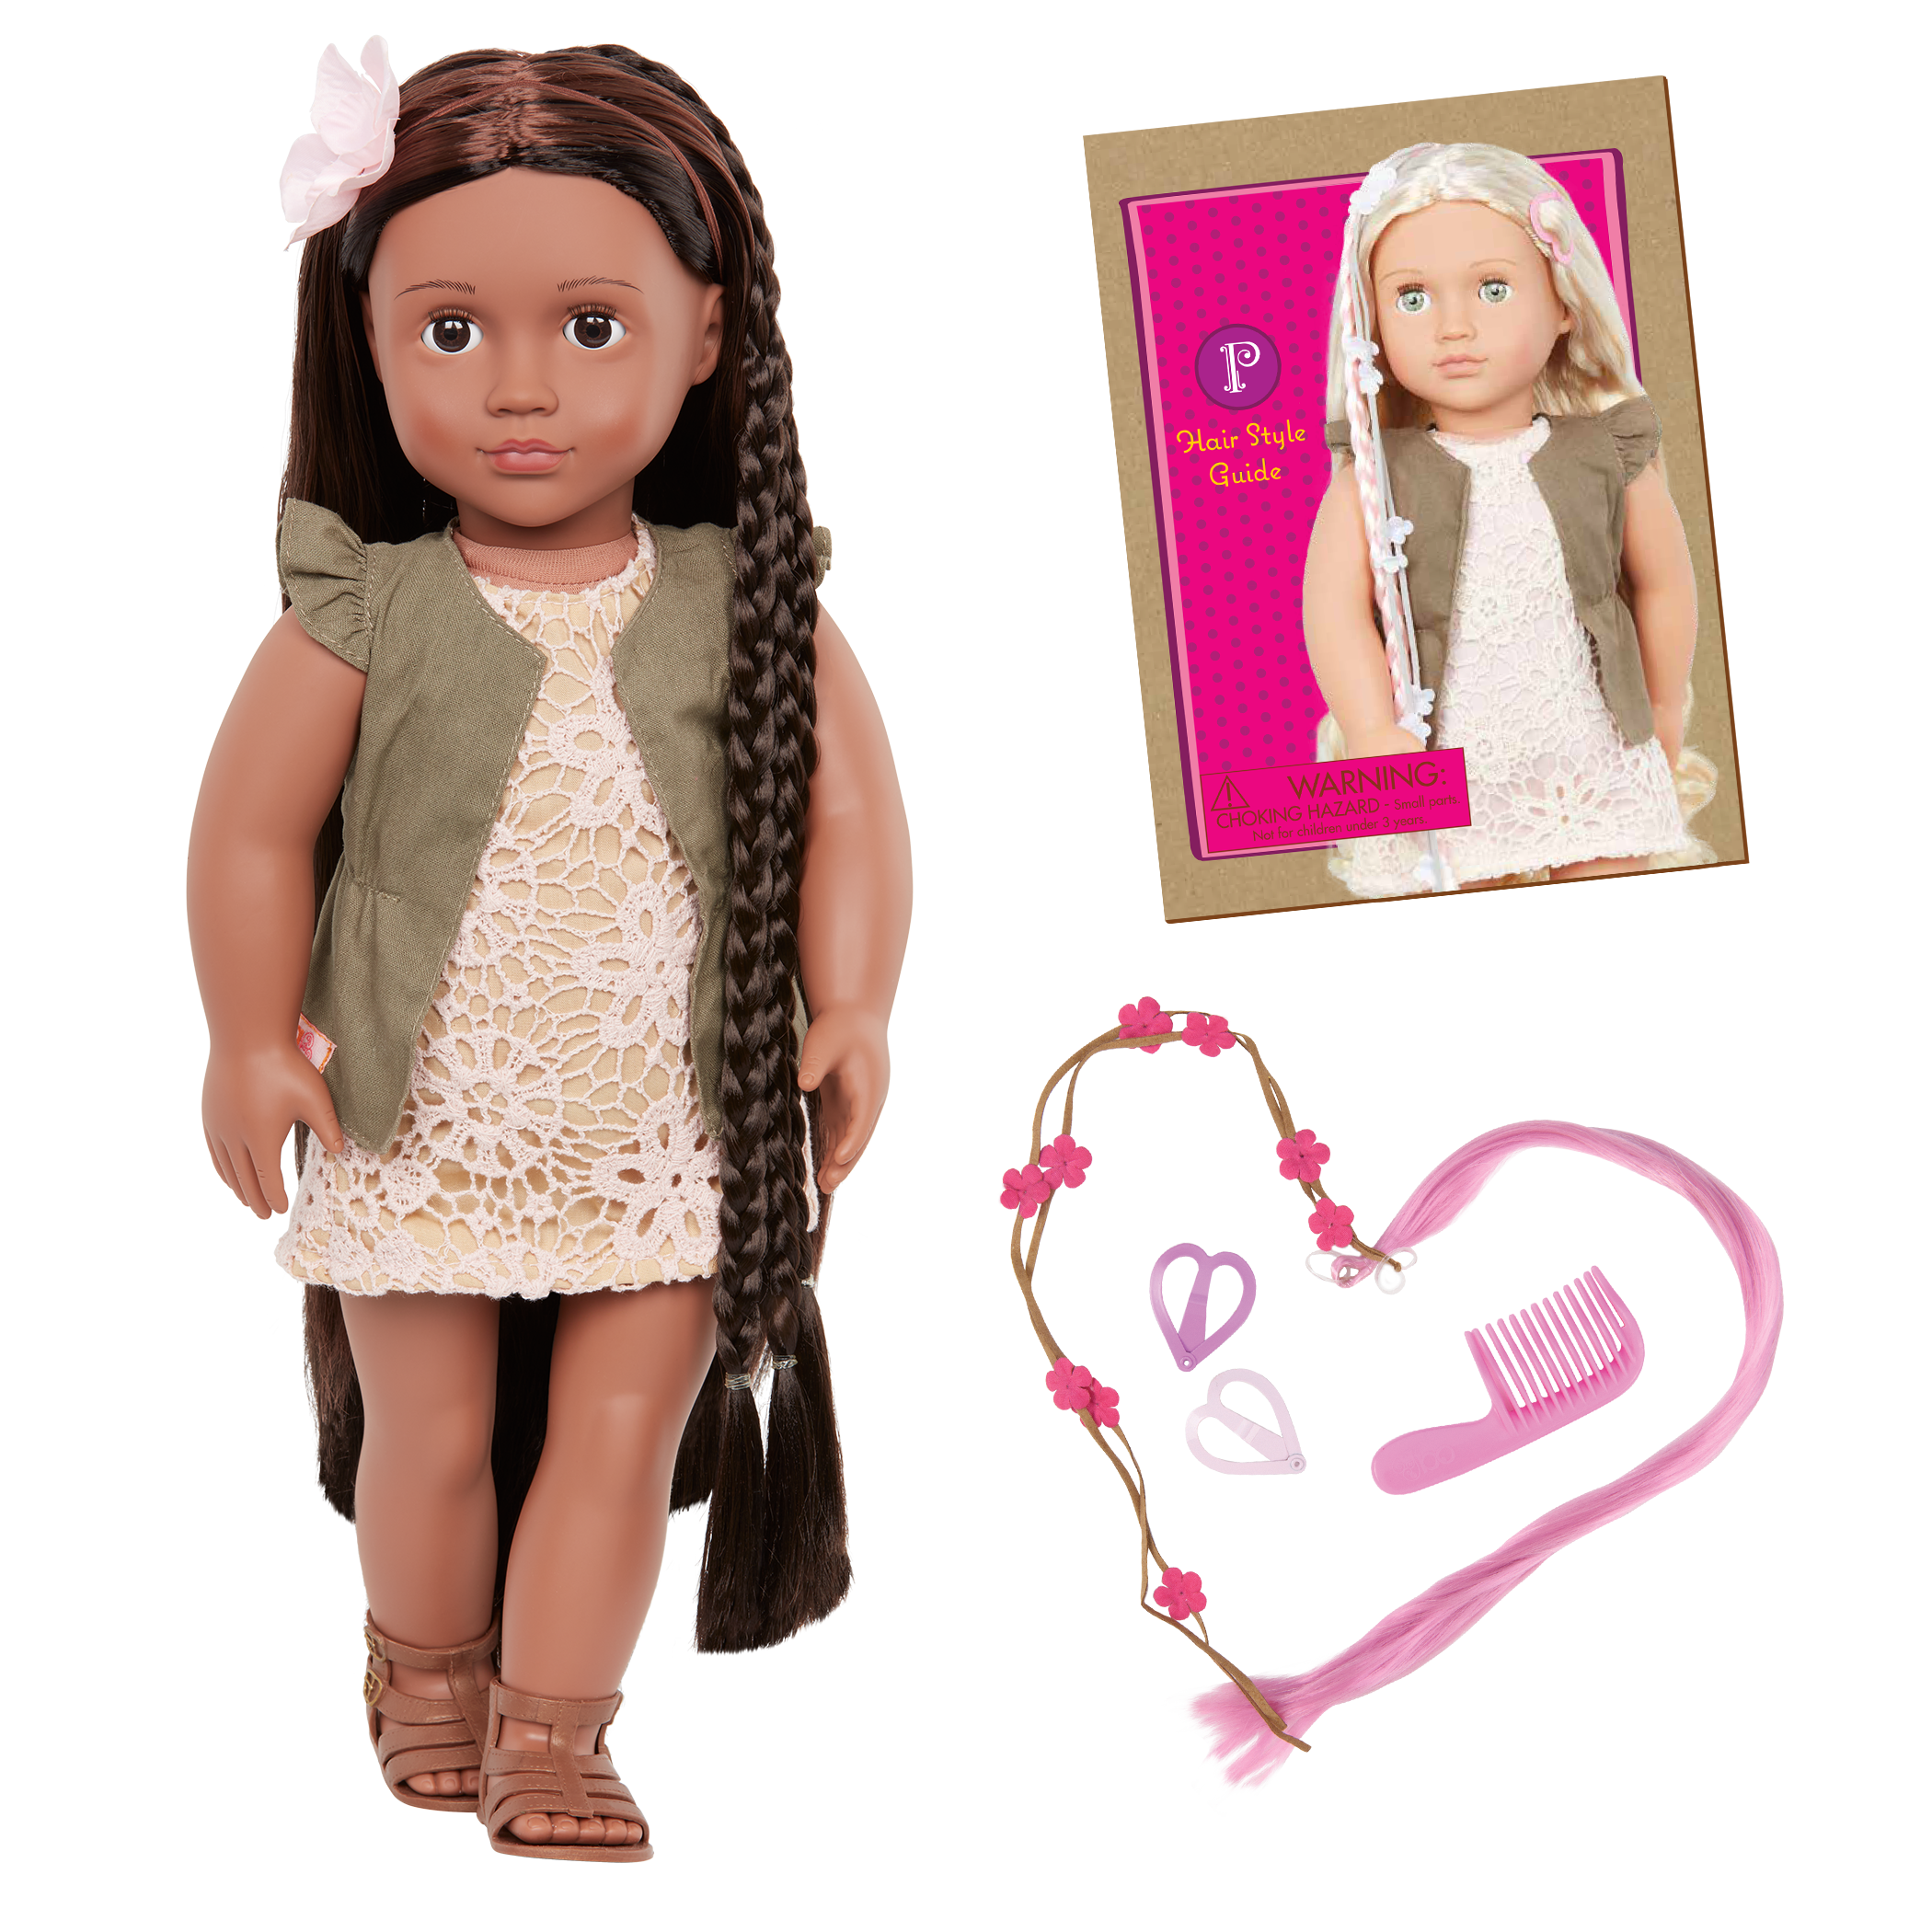 Neveah | 18-inch Hair Play Doll | Our Generation